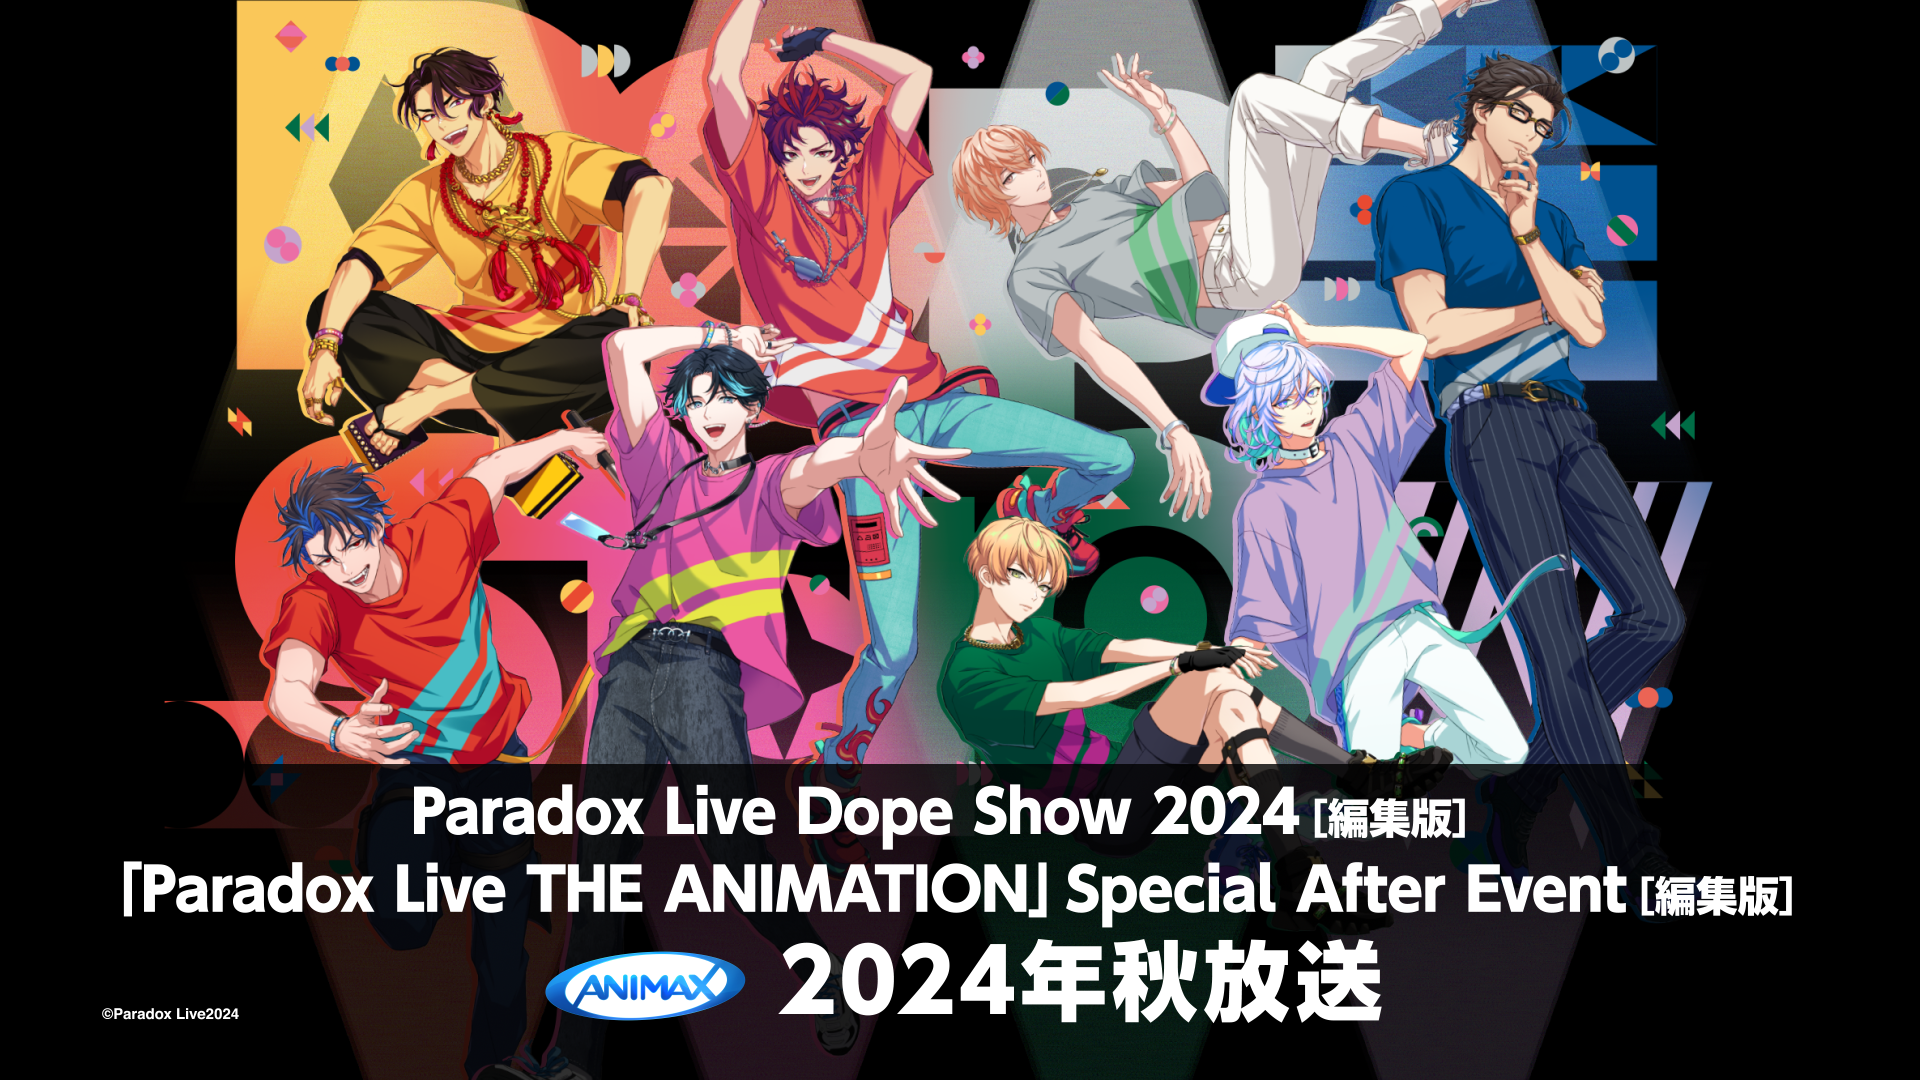 Paradox Live Dope Show 2024［編集版］「Paradox Live THE ANIMATION」Special After Event［編集版］アニマックスで2024年秋放送